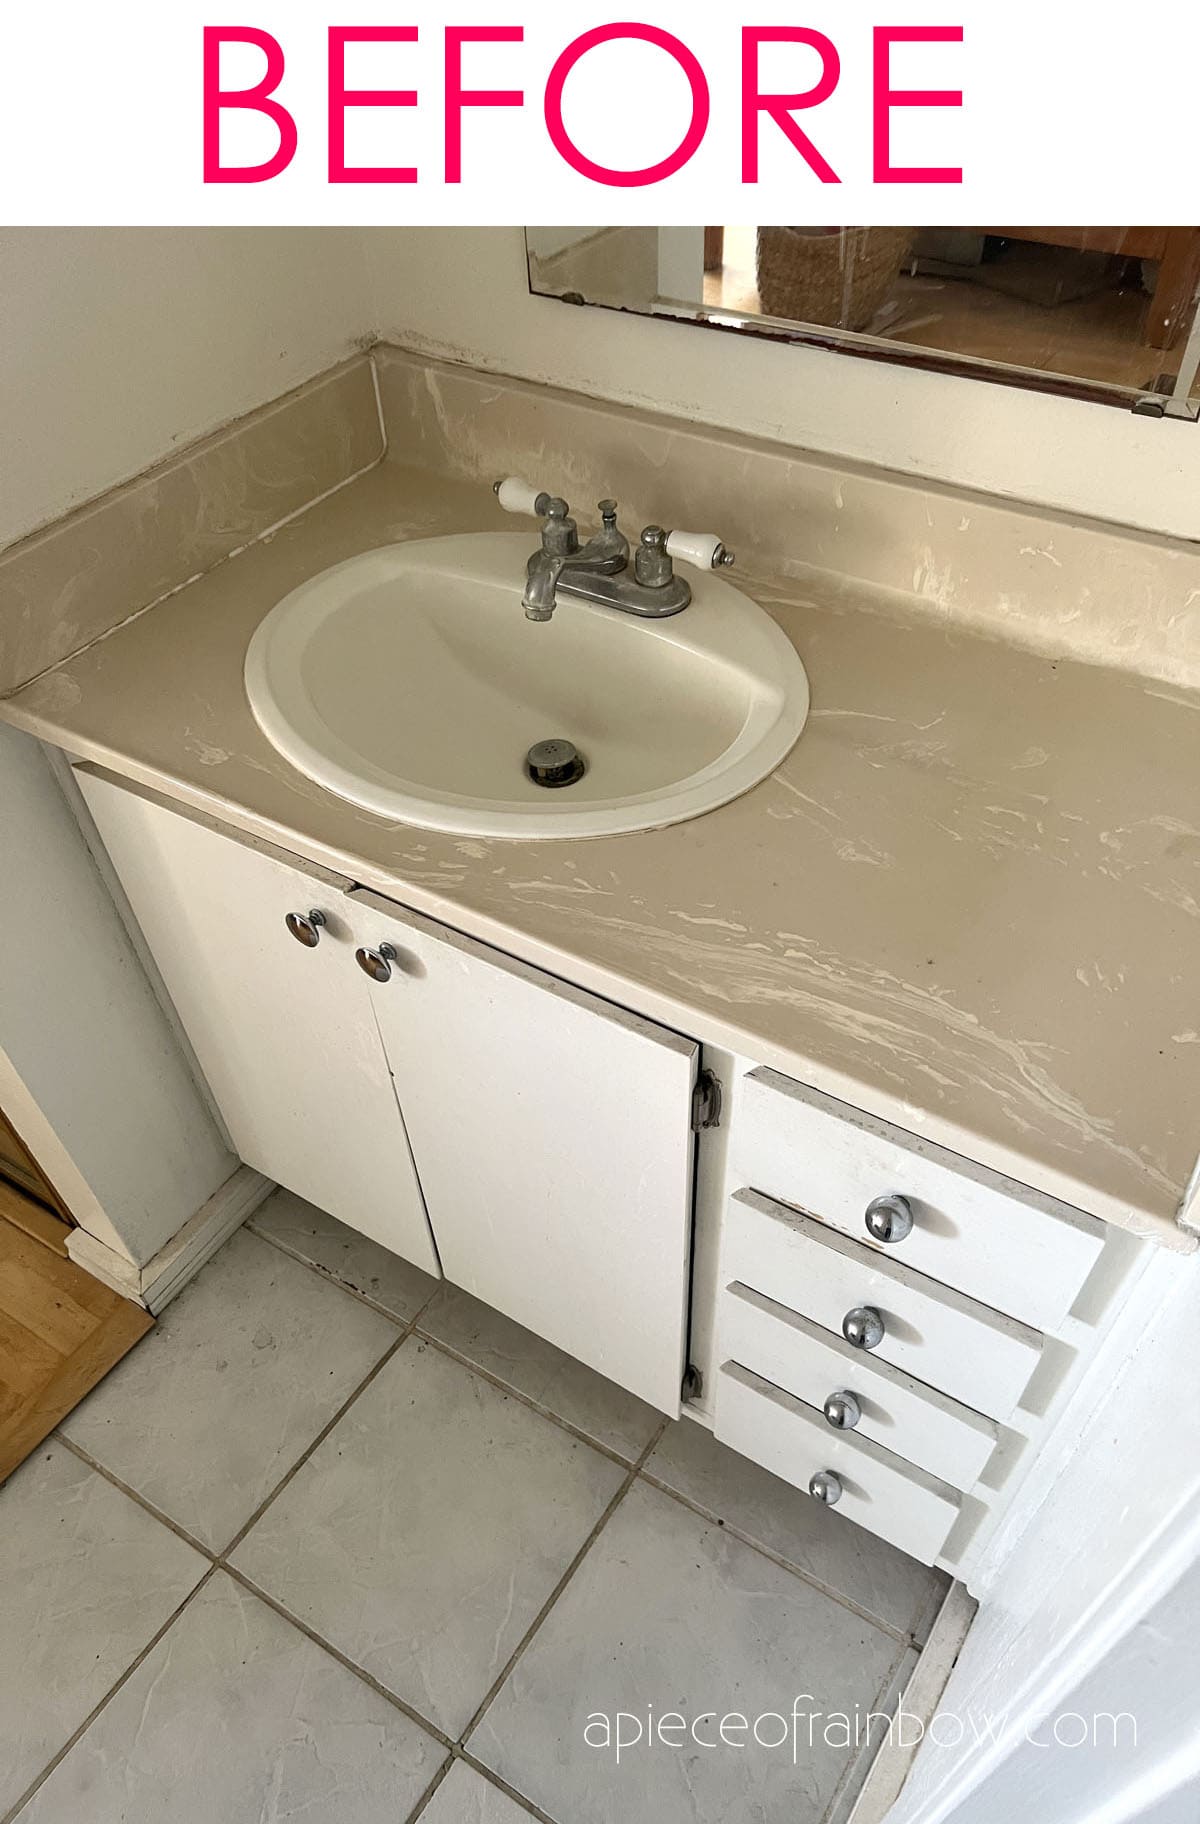 How To Paint Bathroom Countertop Sink Vanity Top White Marble Painting Formica Laminate Counter Epoxy Remodel Makeover Home DIY Ideas Apieceofrainbow 